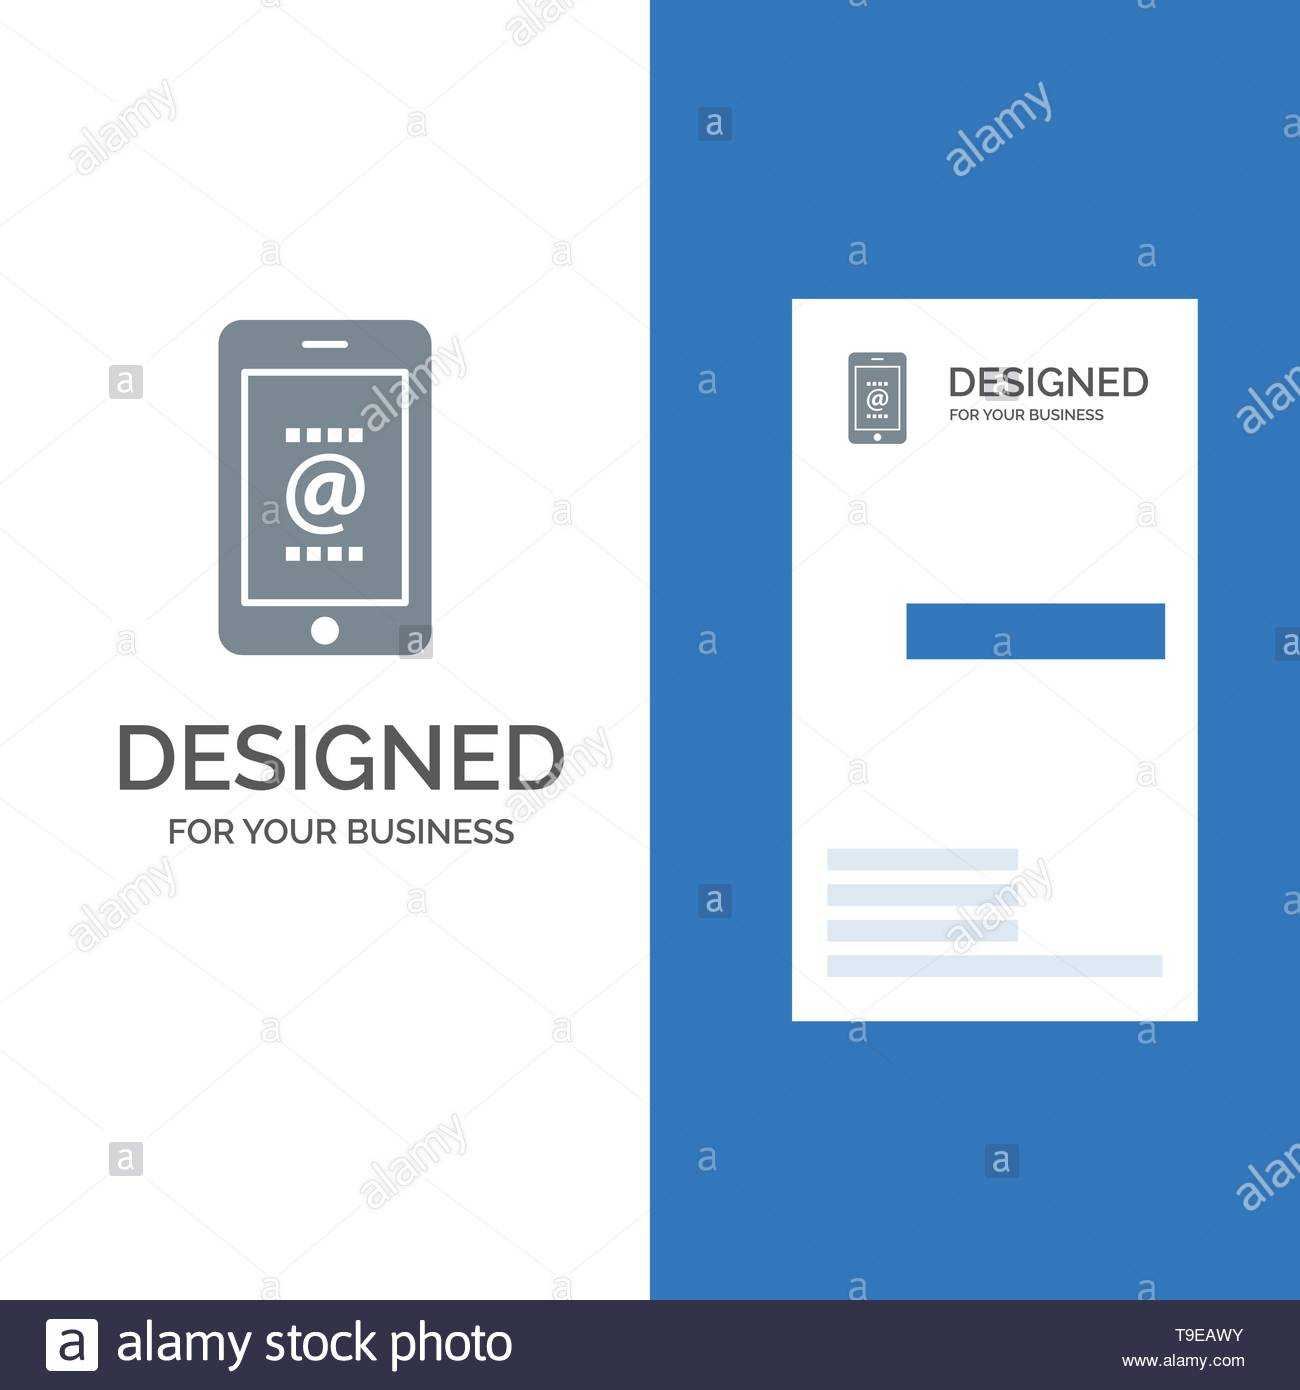 Personal Id Card Stock Photos & Personal Id Card Stock Intended For Personal Identification Card Template